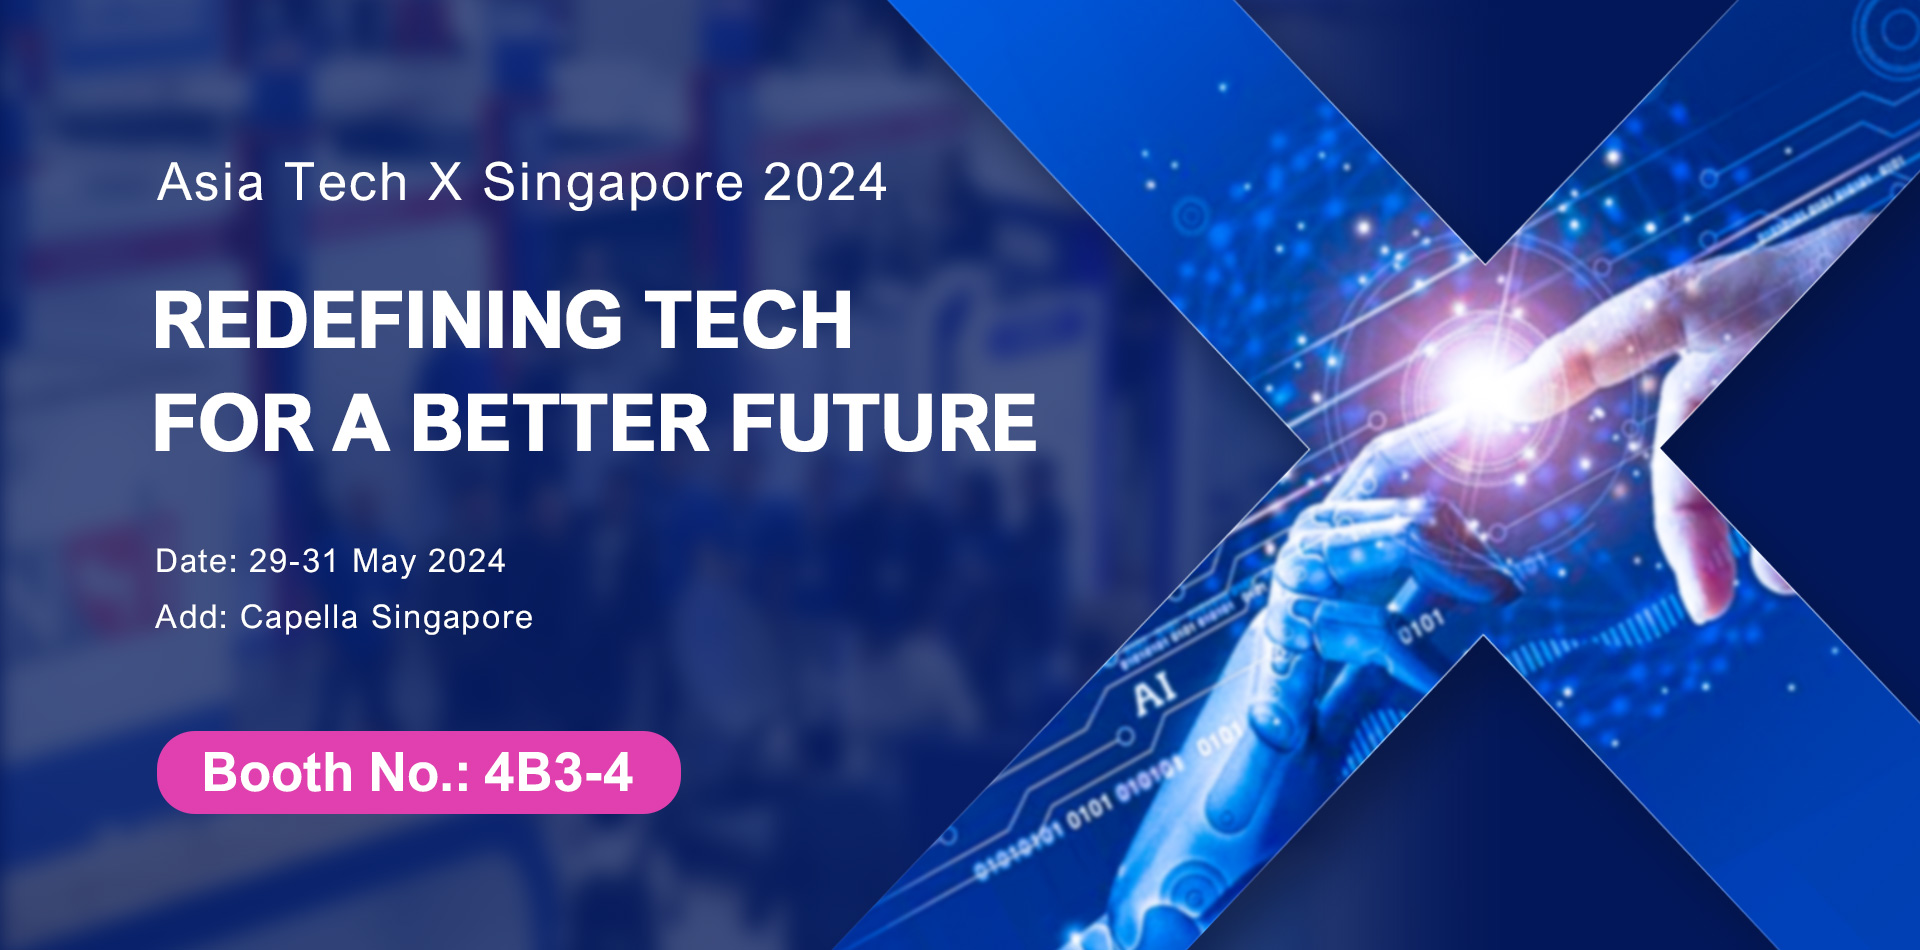 Asia Tech x Singapore 2024REDEFINING TECH FOR A BETTER FUTURE